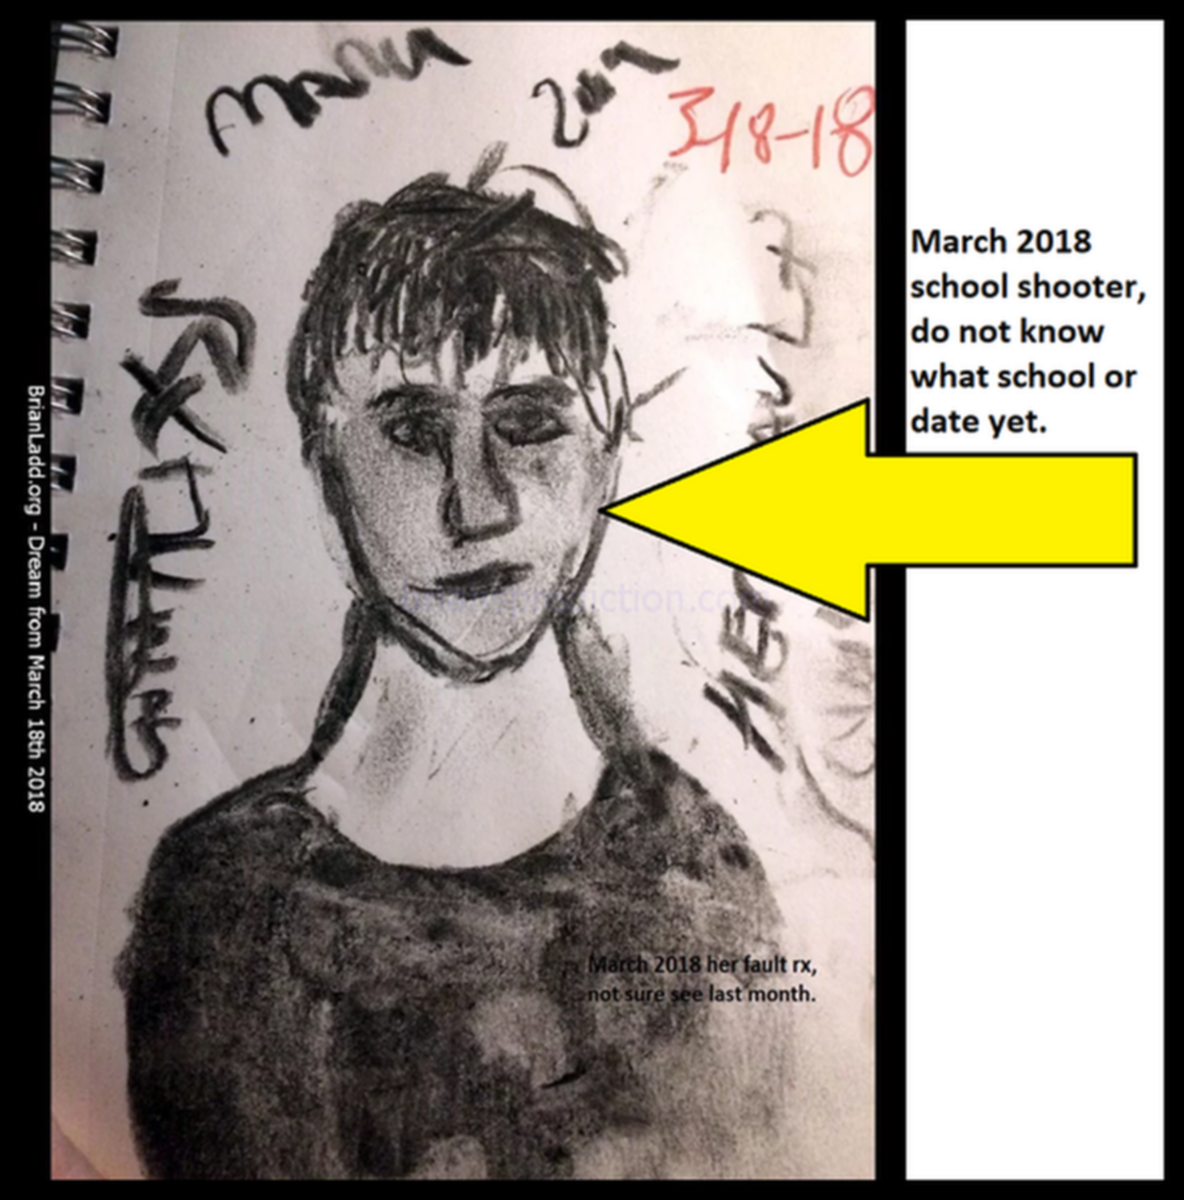 March 2018 school shooter2C do not know what school or date yet dream from March 17th 2018~0
March 2018 school shooter2C do not know what school or date yet dream from March 17th 2018~0
